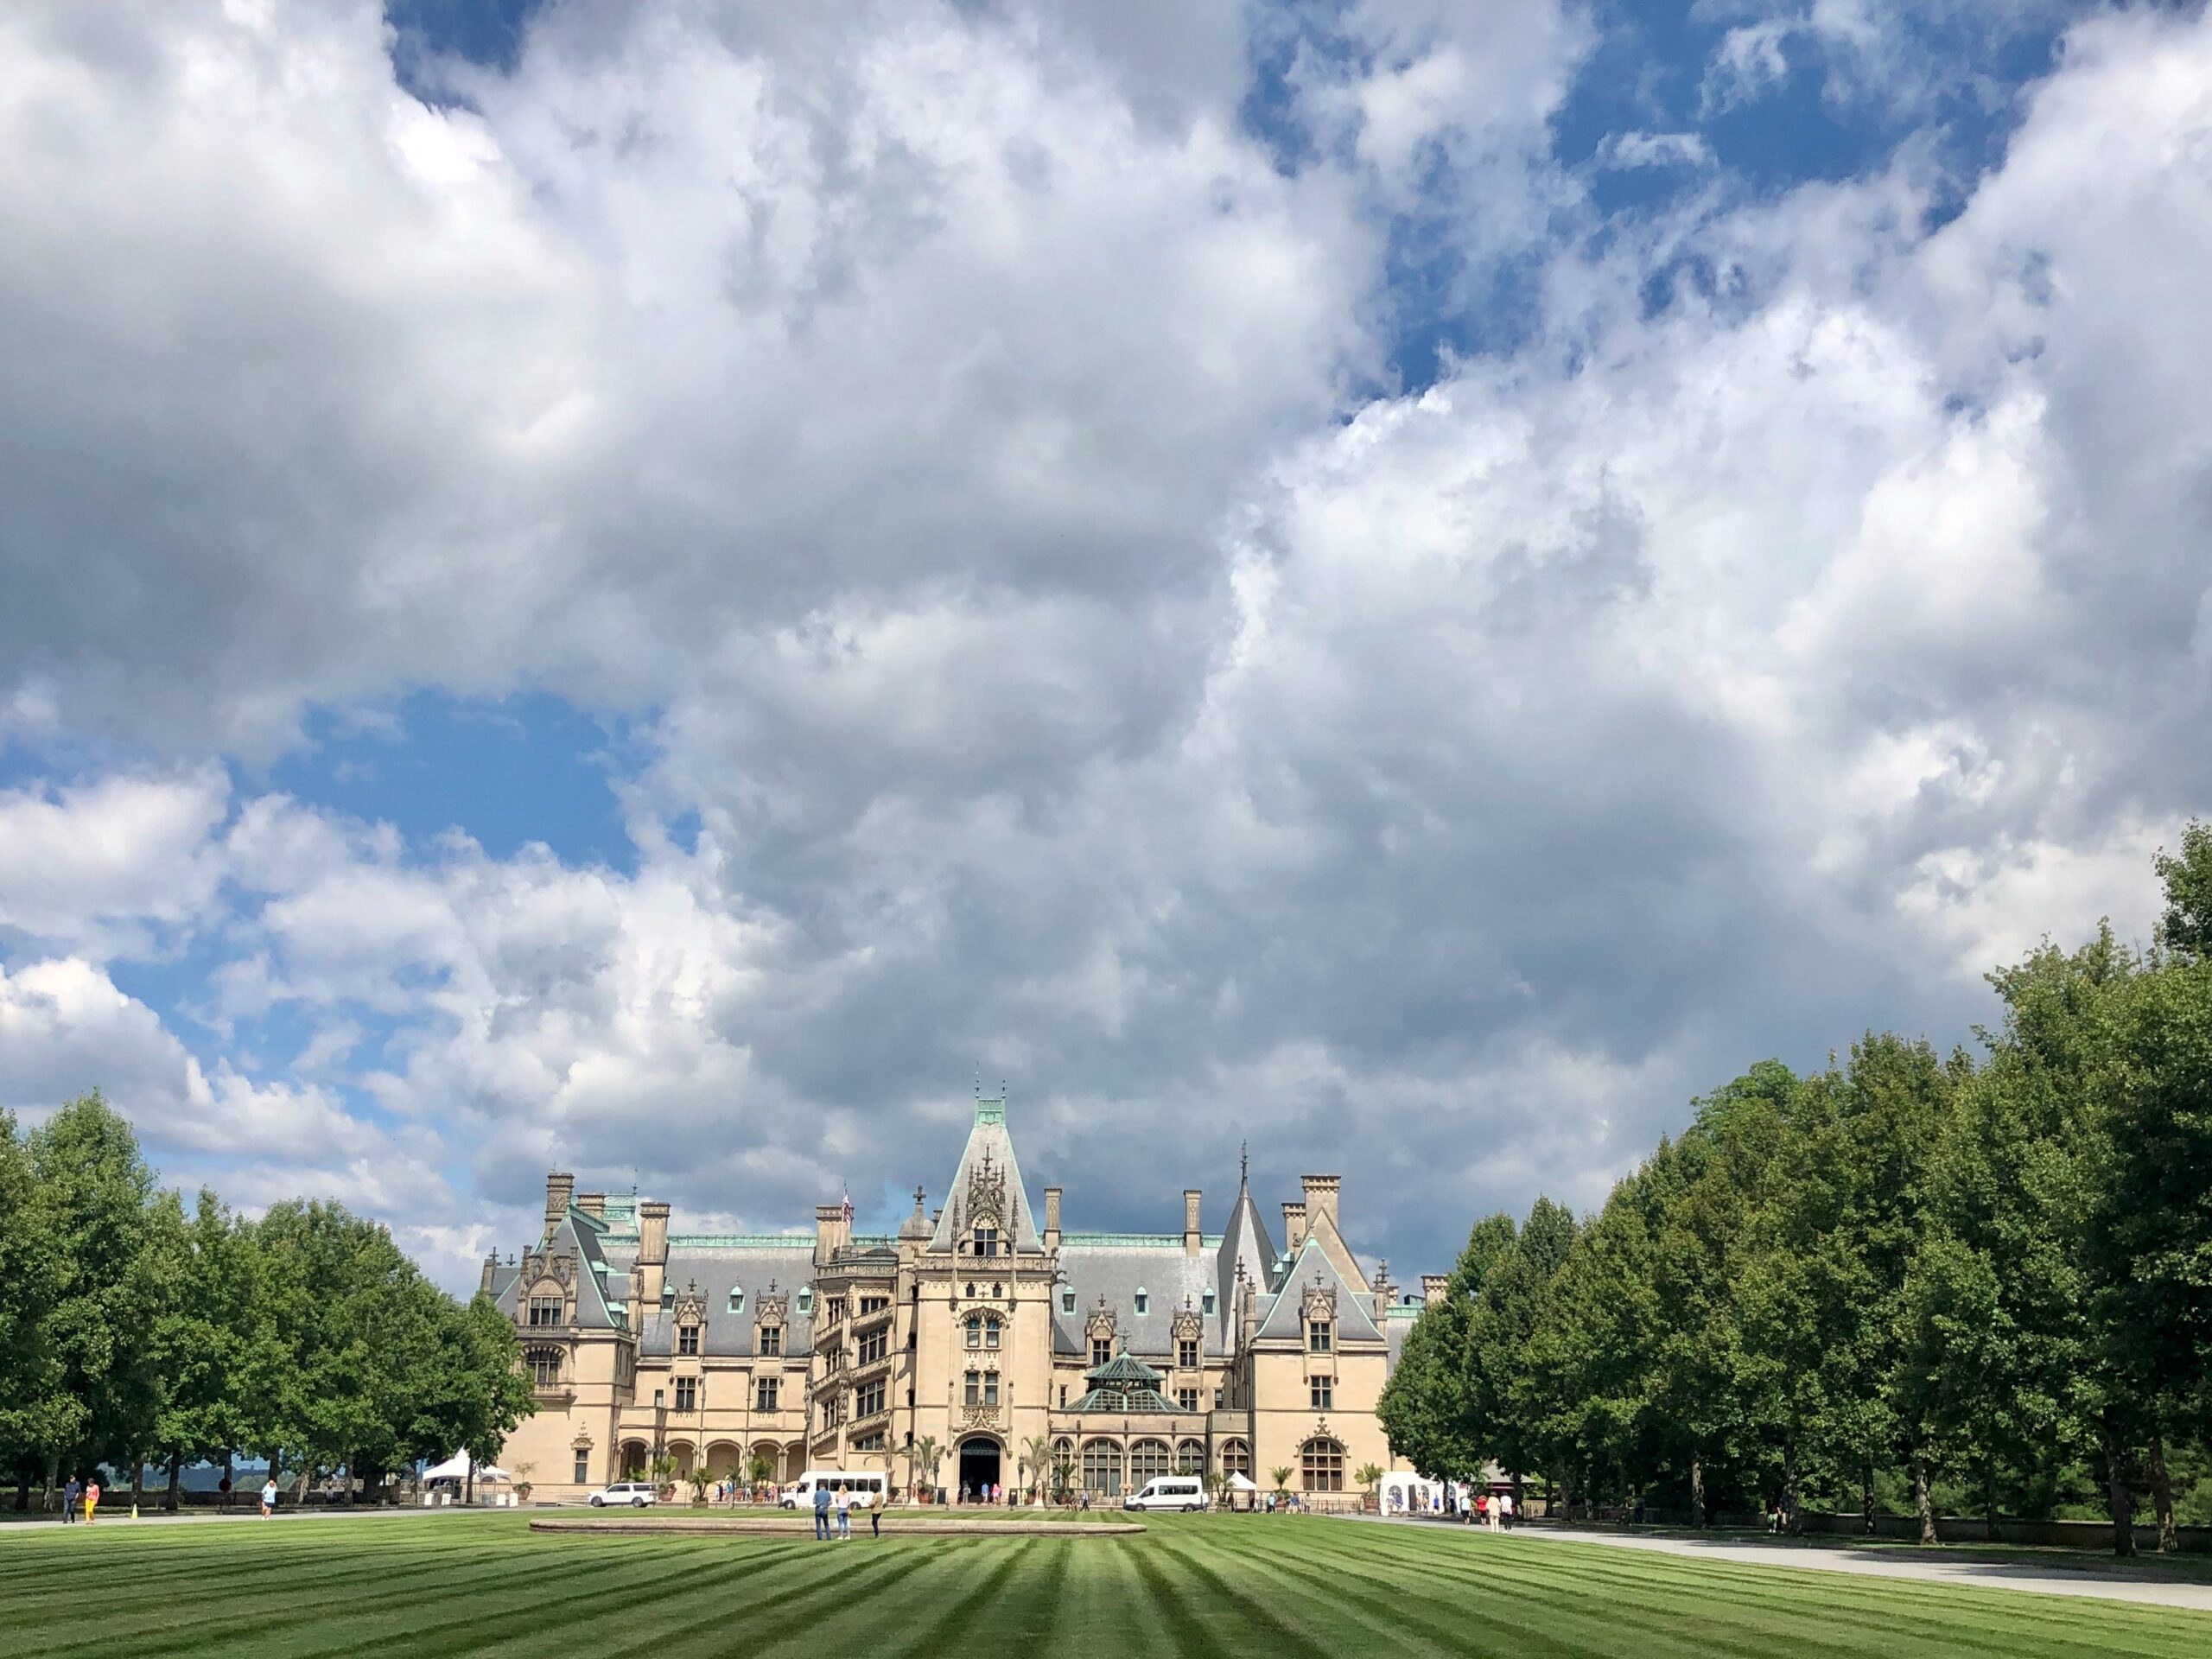 Biltmore Estate in Asheville can be seen from the lawn under fluffy clouds and blue skies